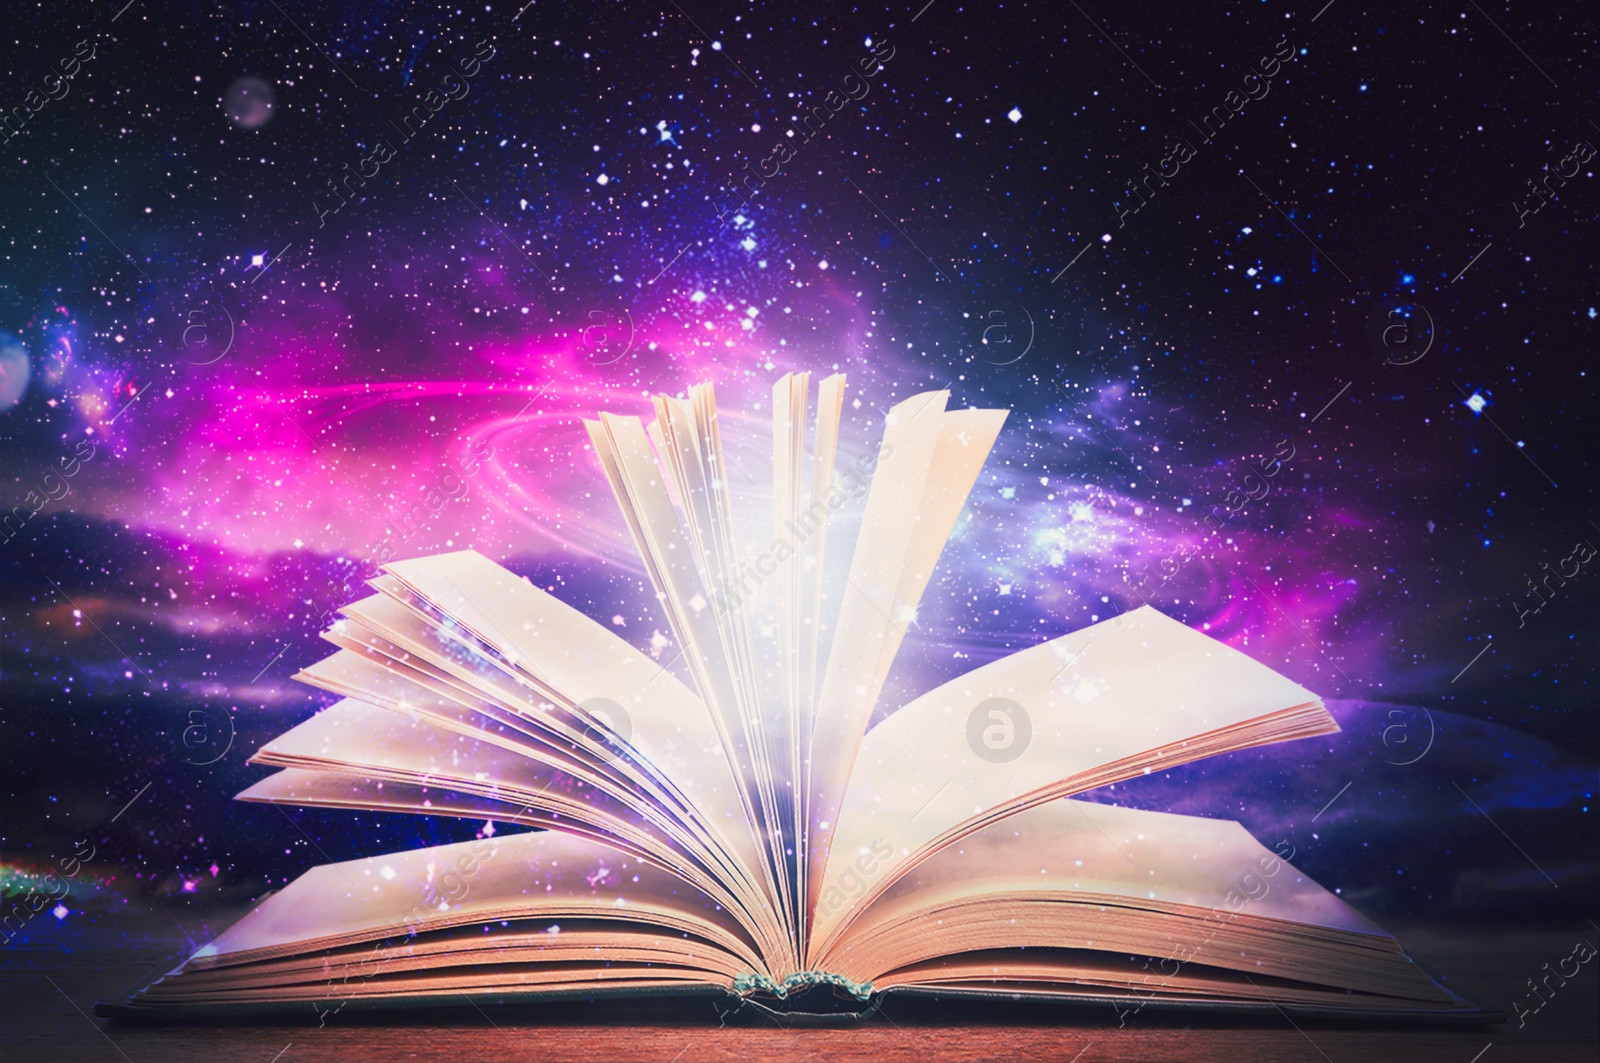 Image of Open book with glitter overlay and beautiful universe on background